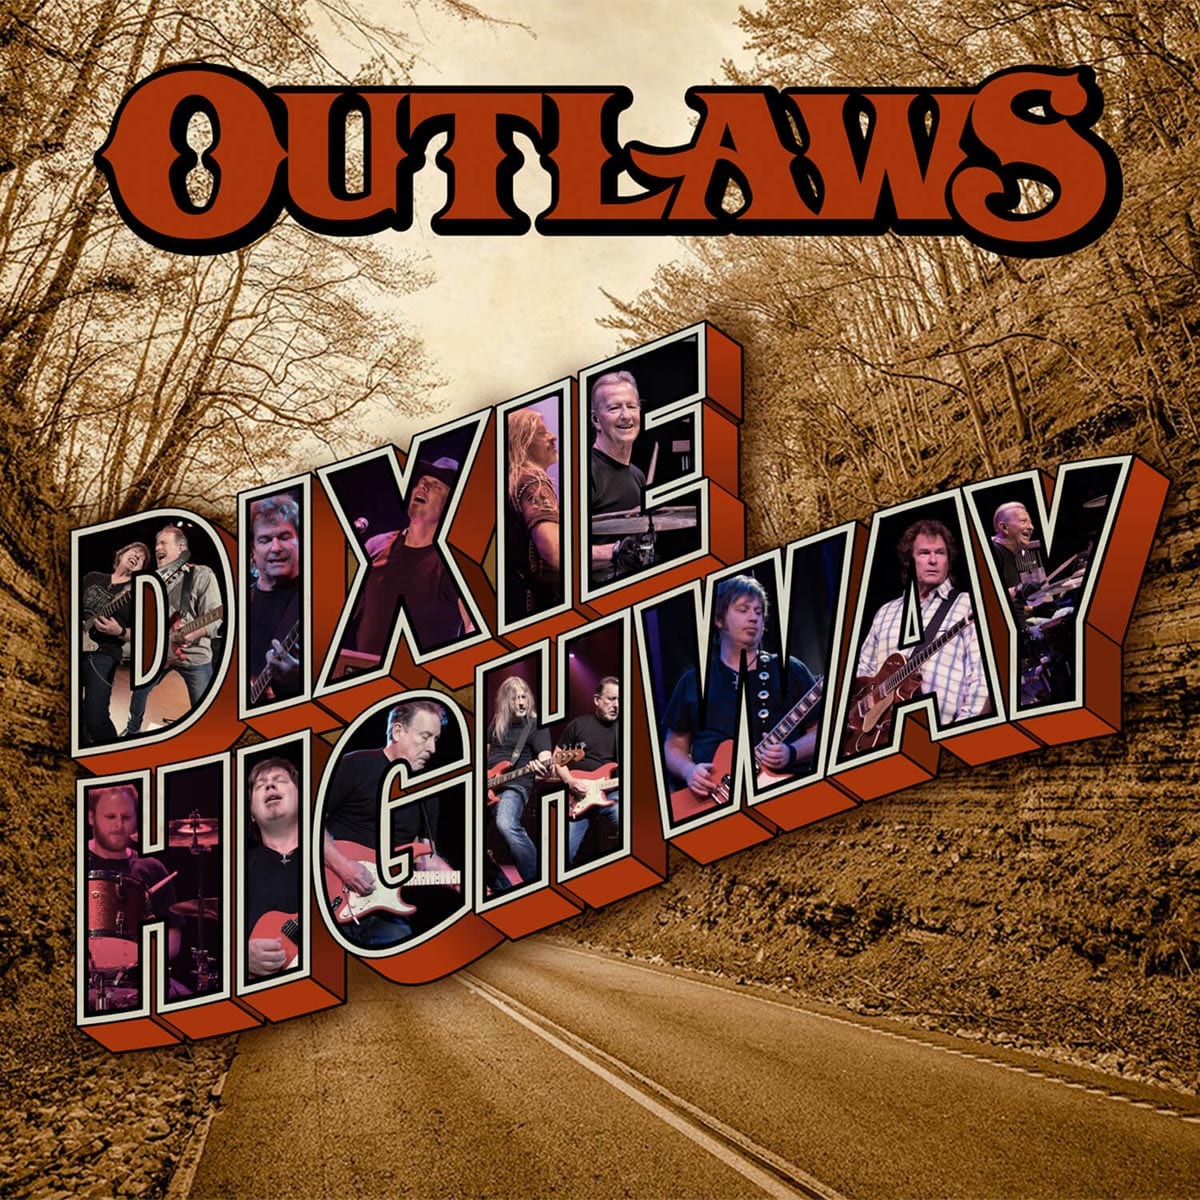 The Outlaws Dixie Highway album cover